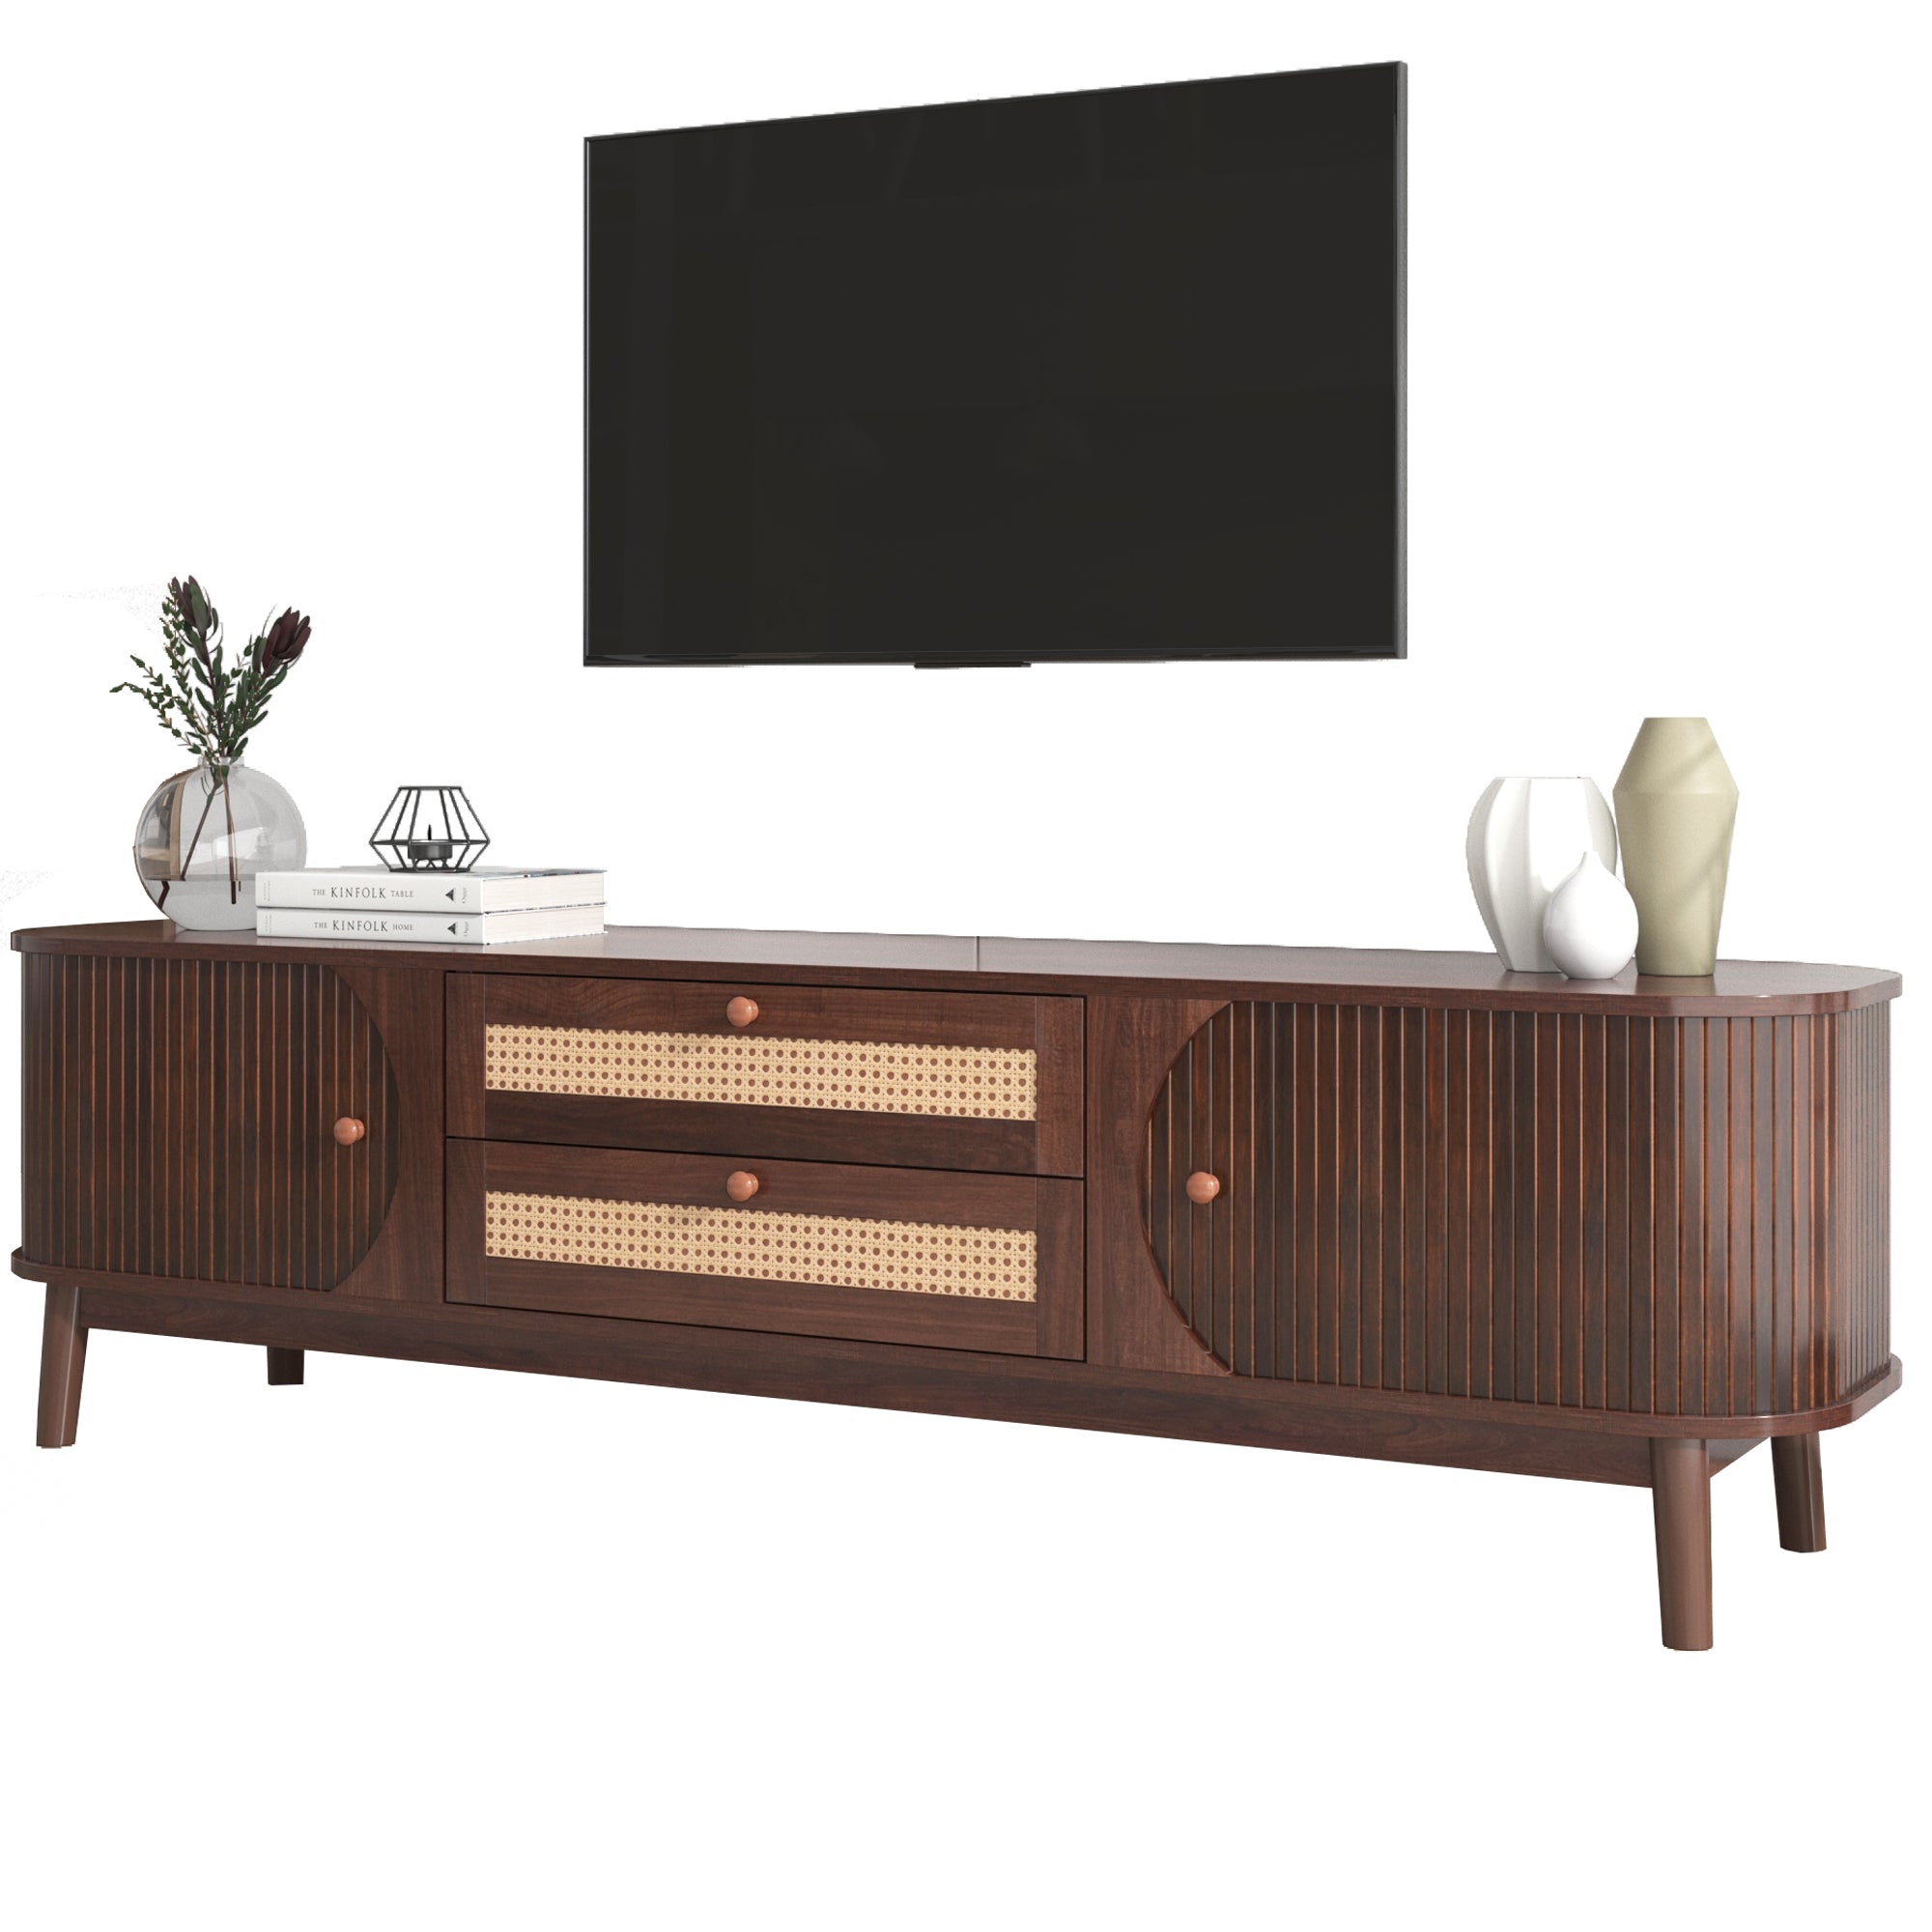 Rattan TV Stand for TVs up to 75'', Modern Farmhouse natural wood+brown-primary living space-60-69